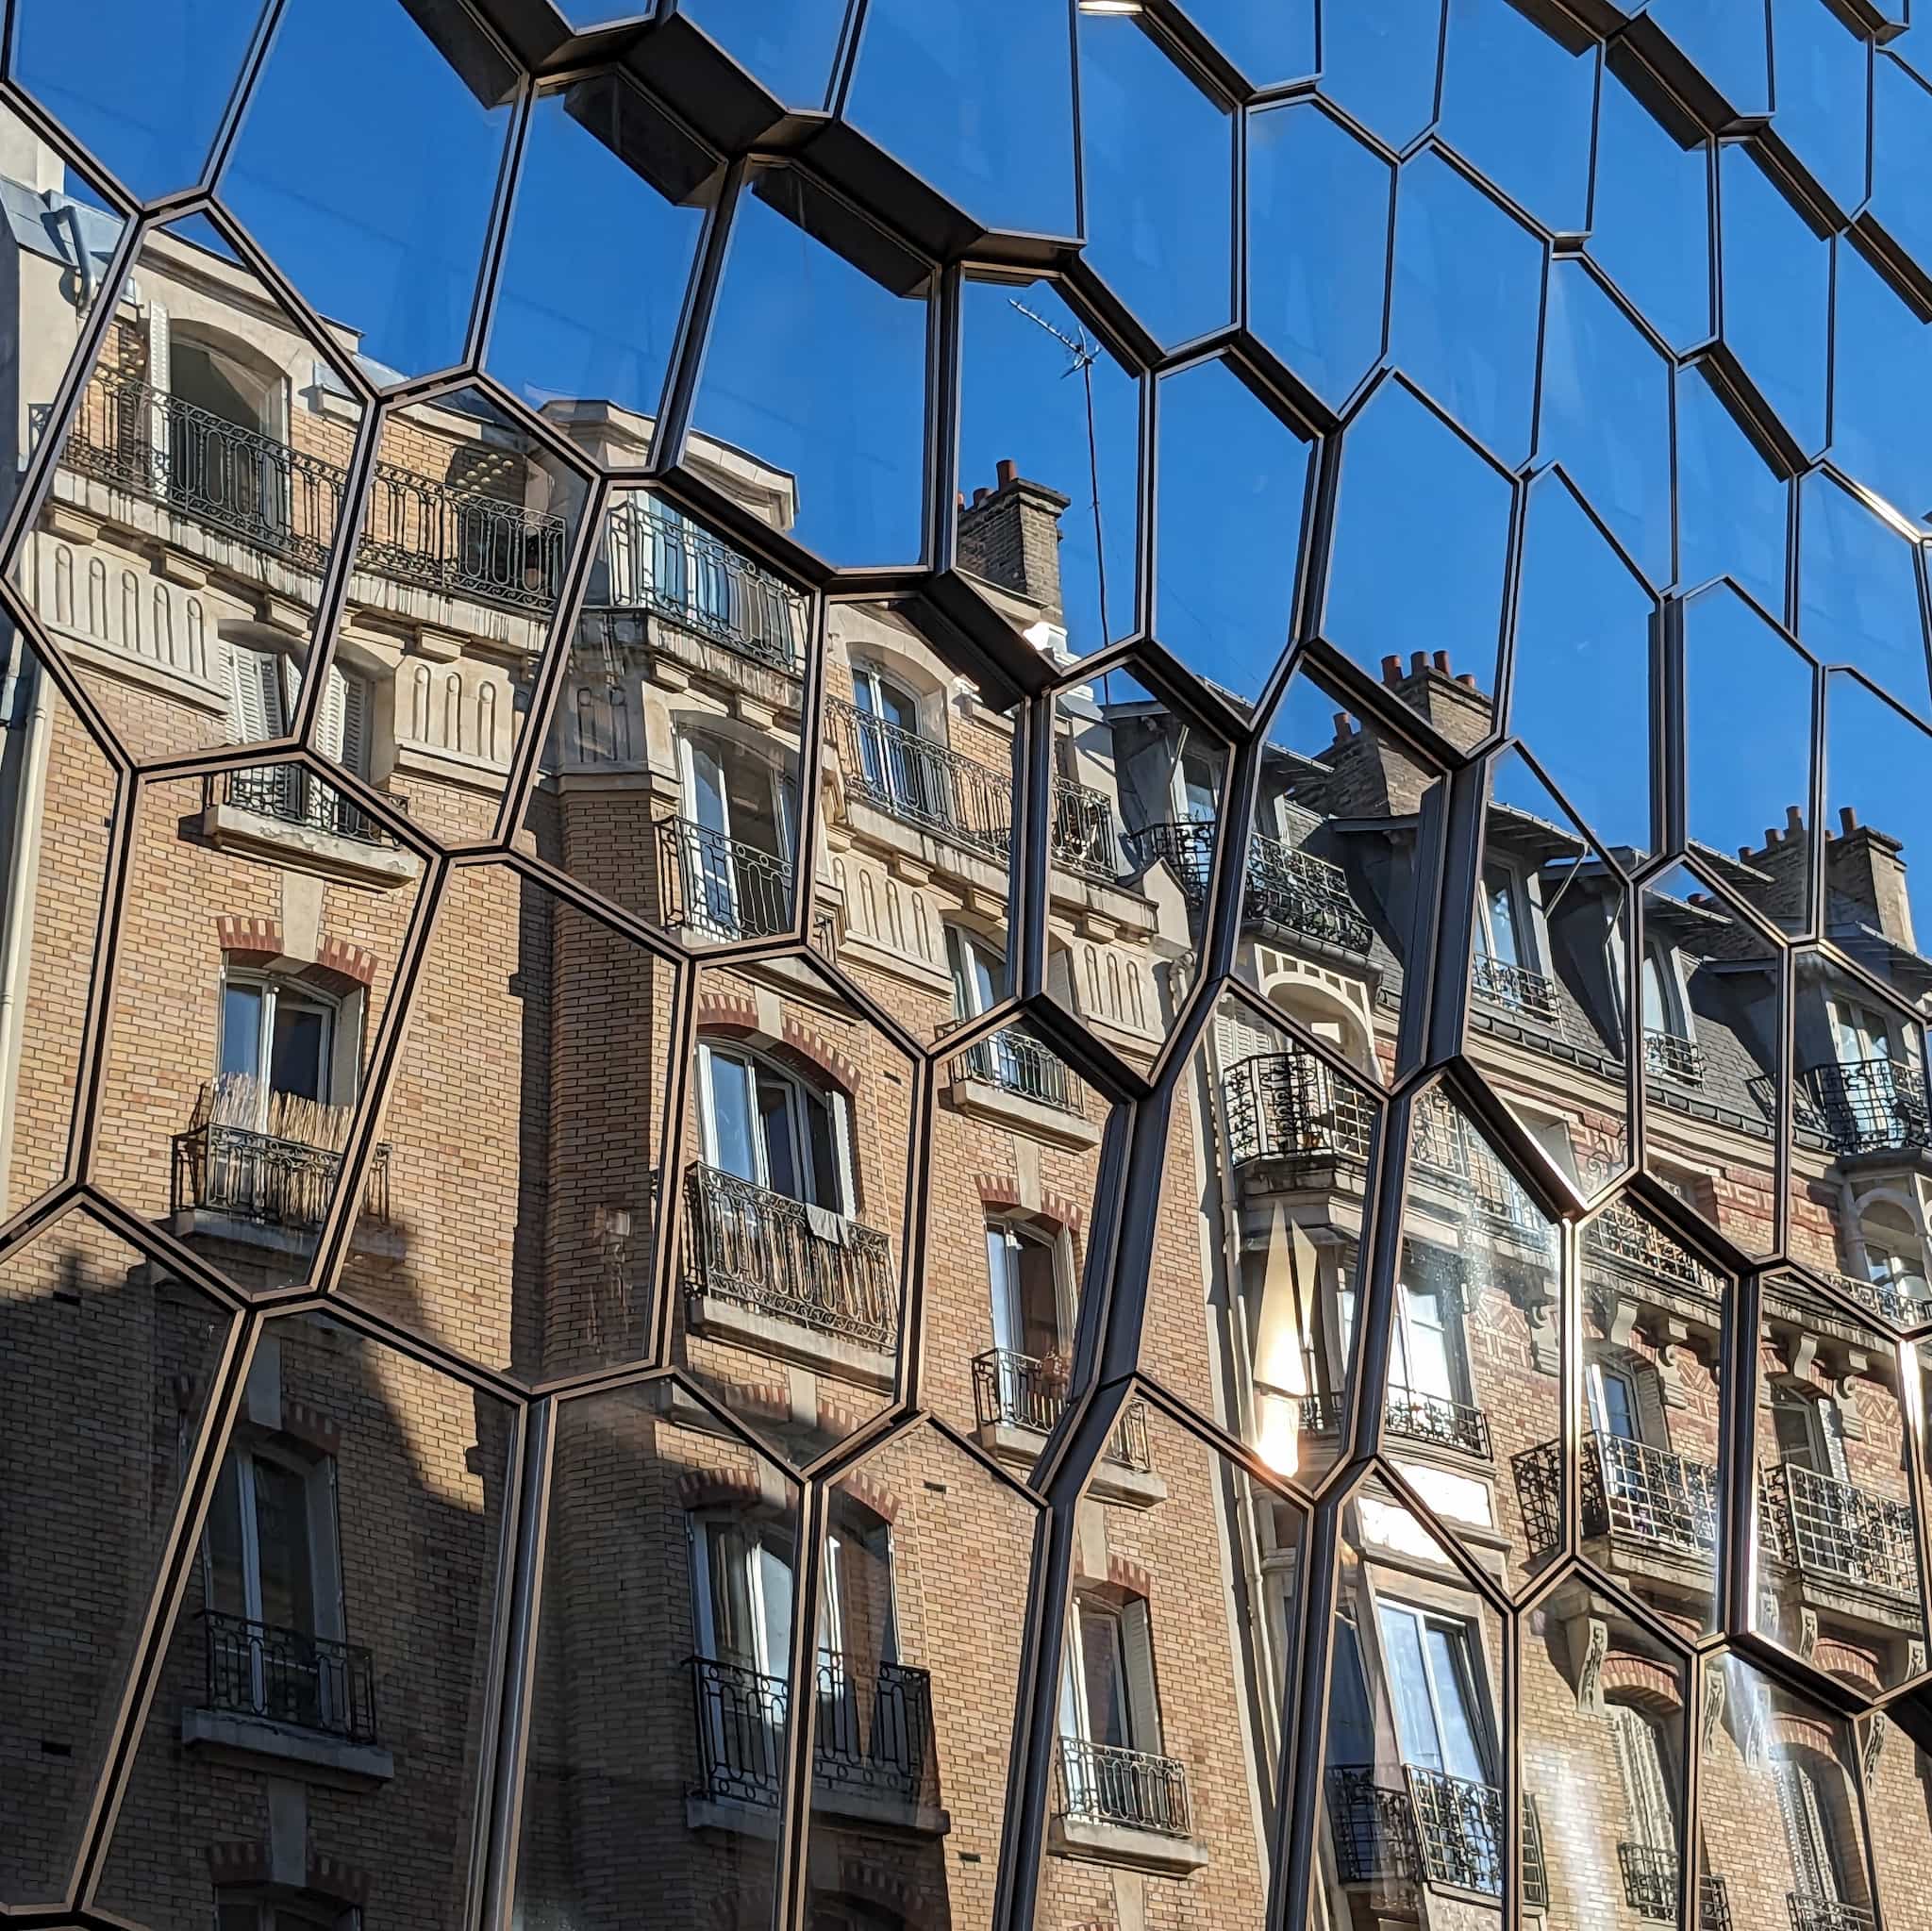 Reflection of a brick building in irregular hexagon shaped glass panels.